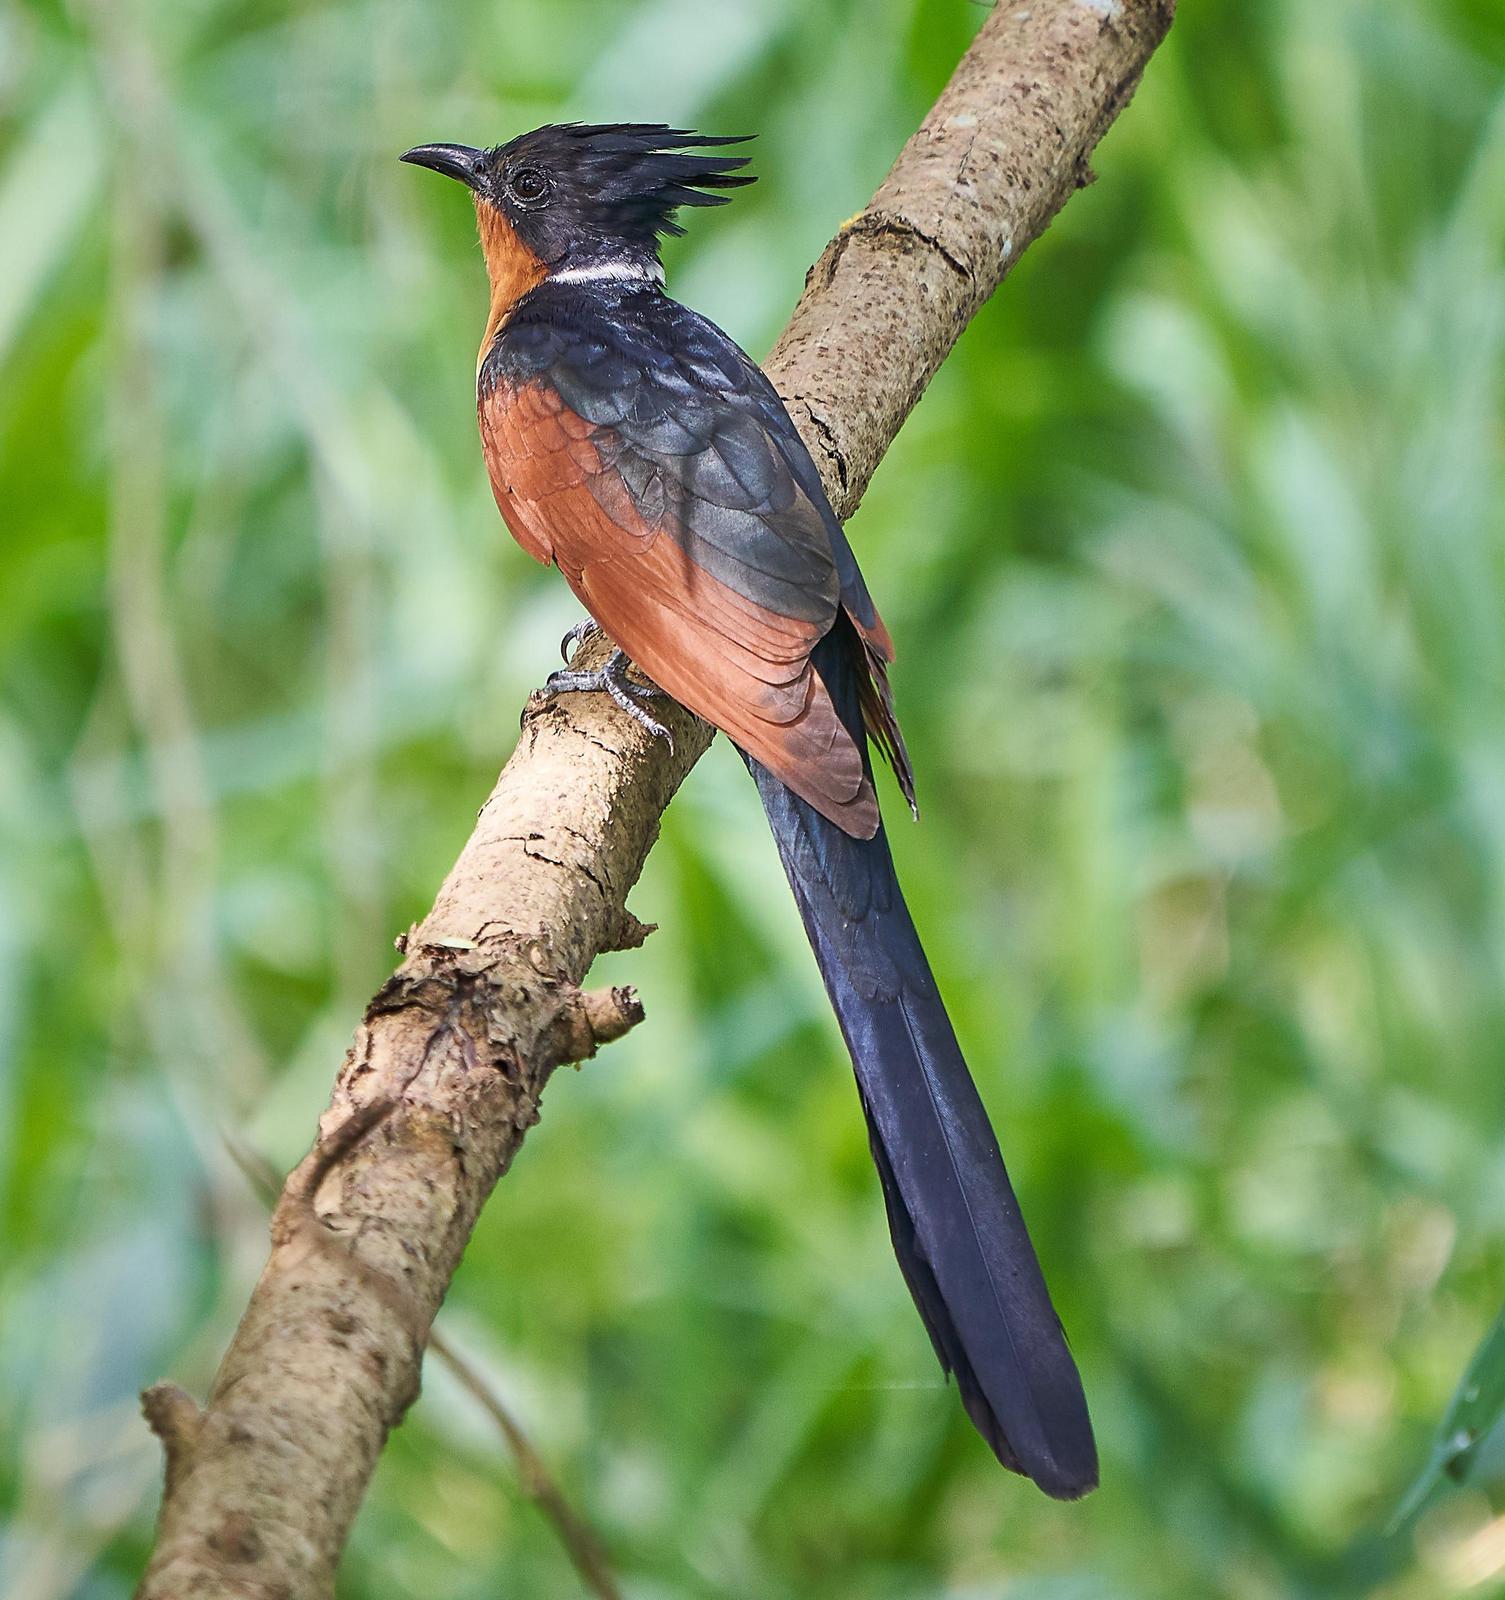 Chestnut-winged Cuckoo Photo by Steven Cheong